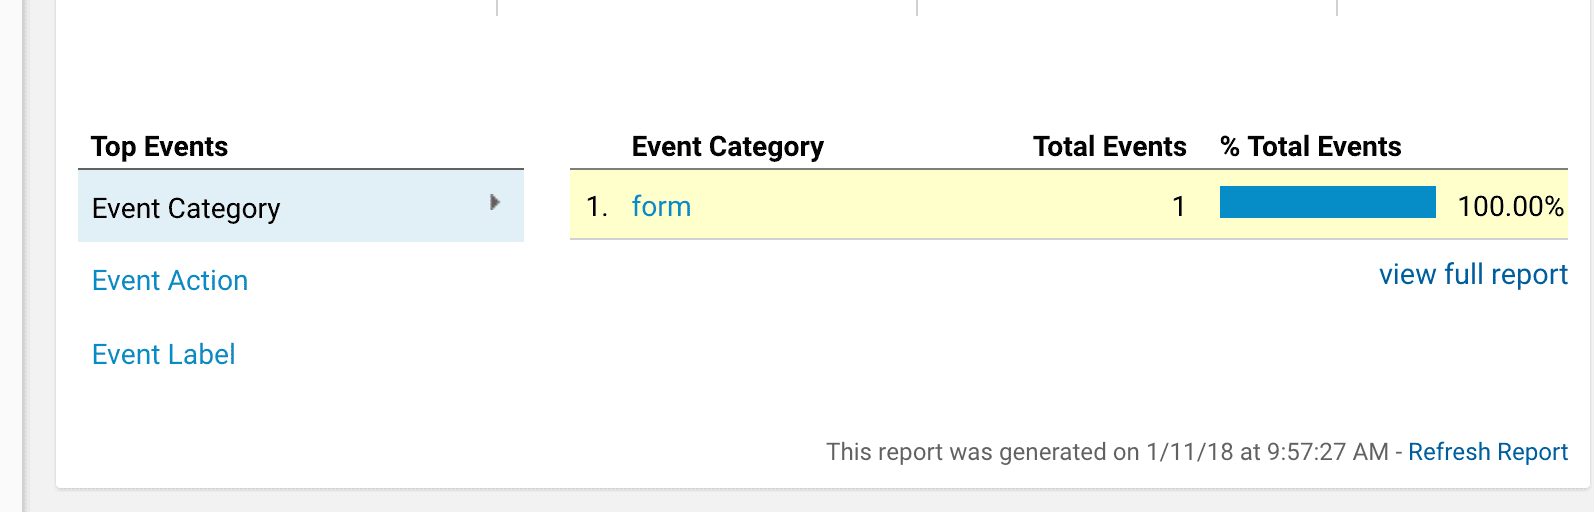 Form Event Tracking